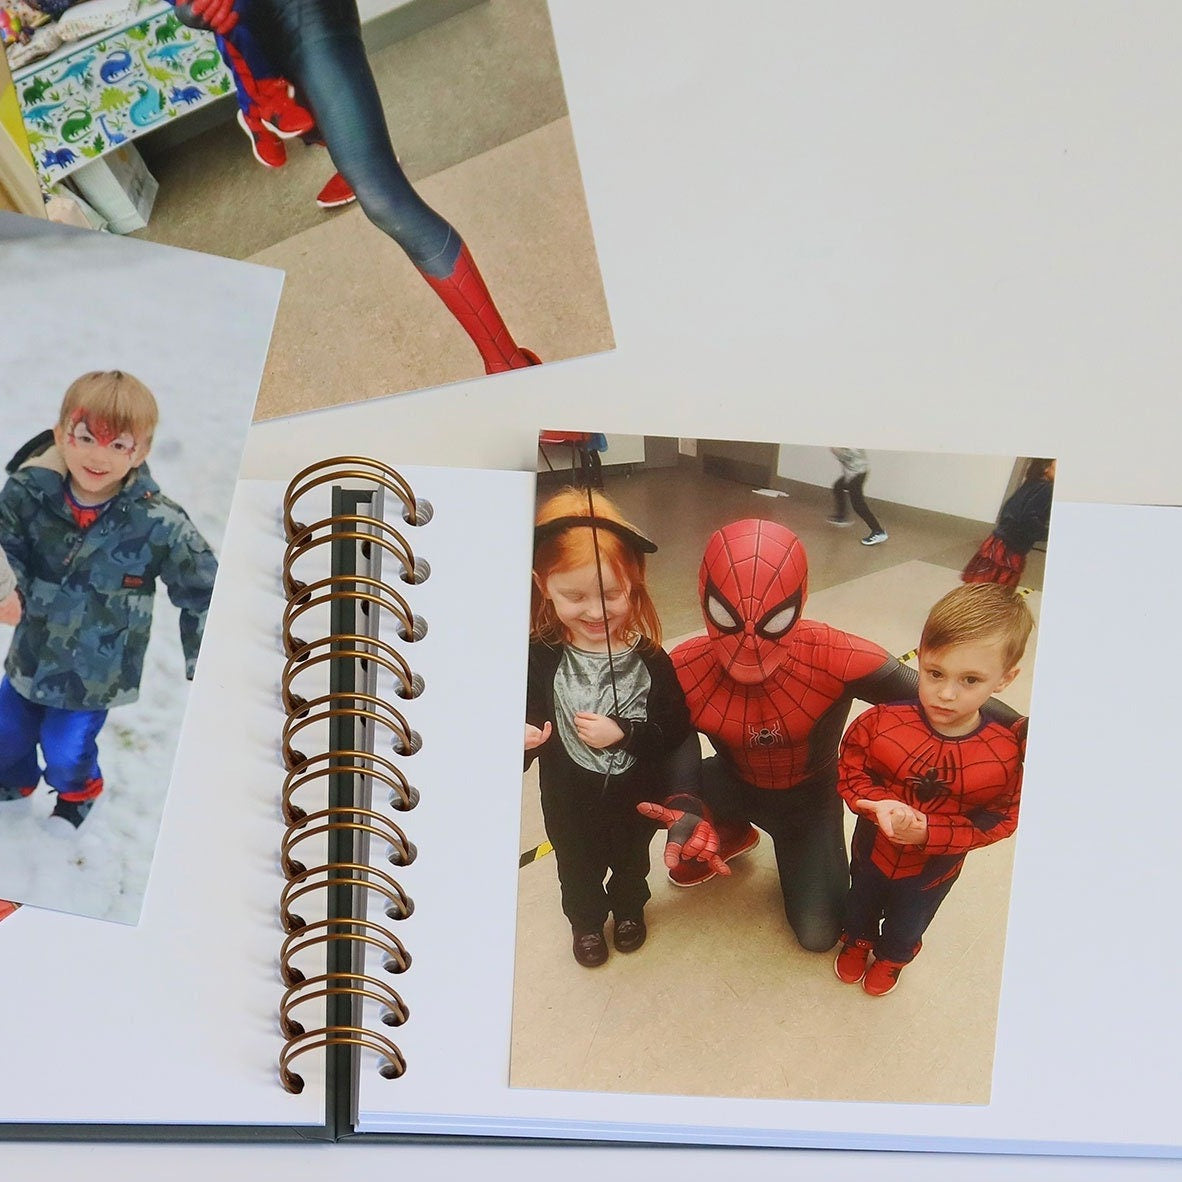 The inside pages of the A5 childrens memory book, There are pictures of a small boy with spiderman